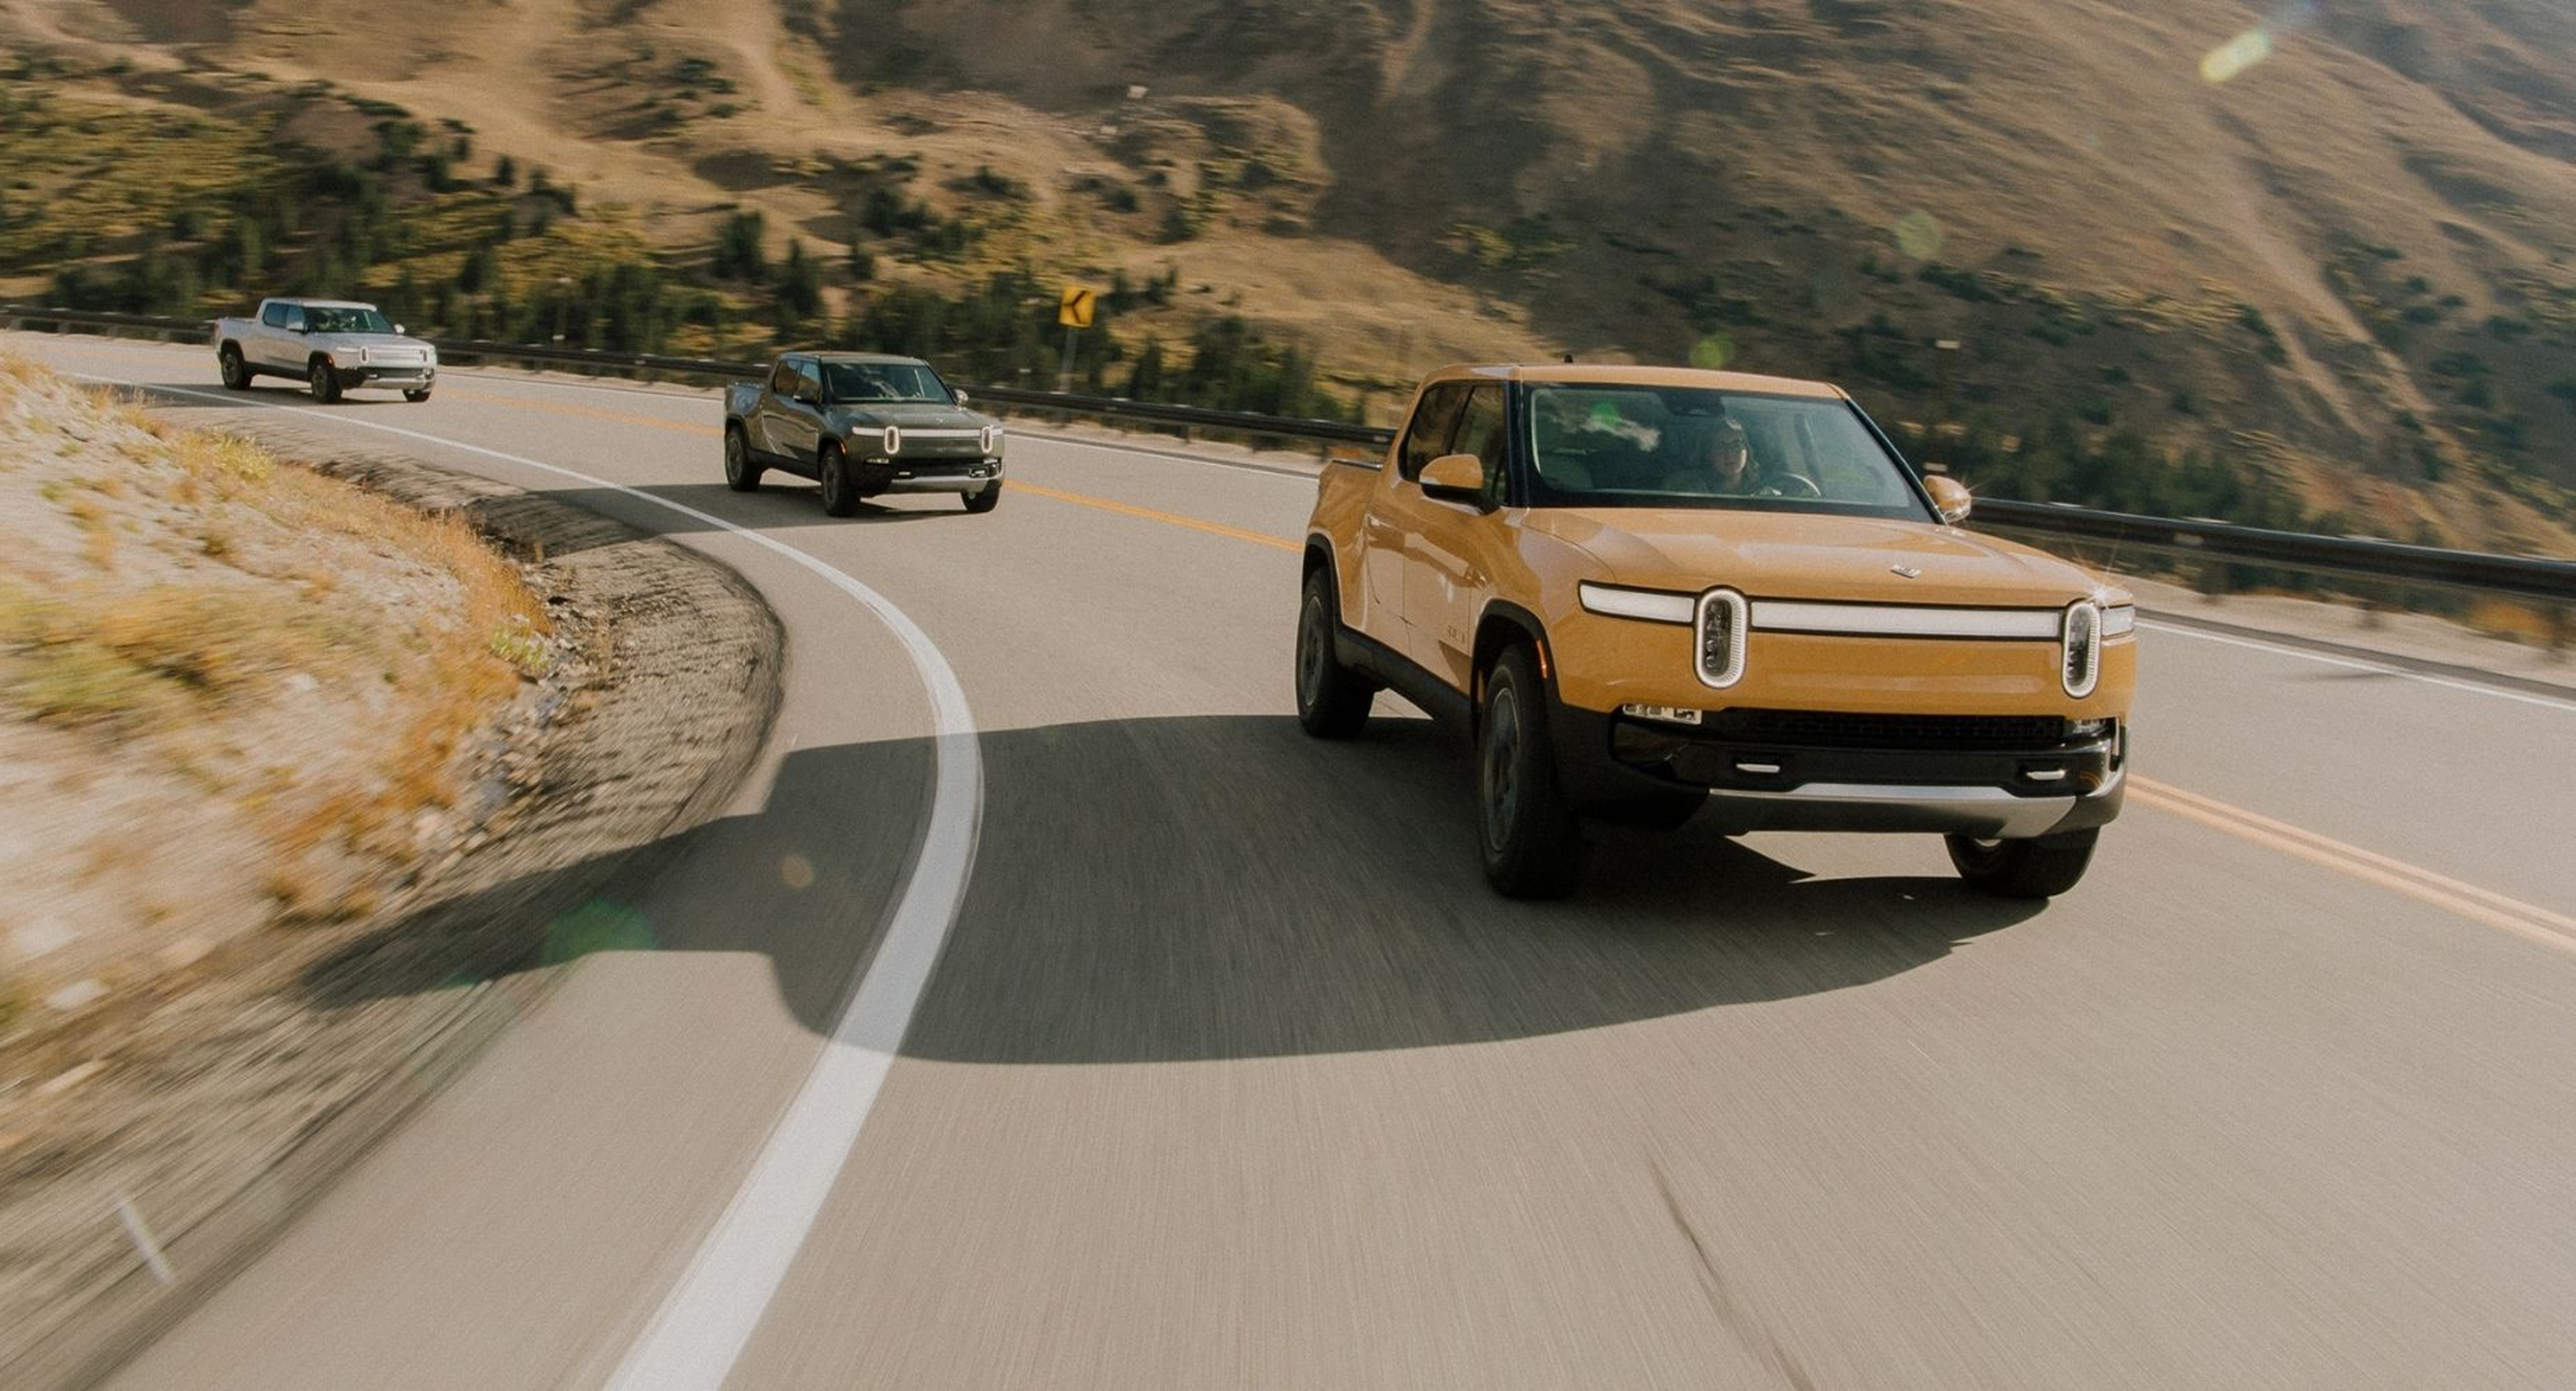 Rivian Analyst Drops Bullish Stance Ahead Of Earnings: Find Out Why And What EV Stocks He Prefers